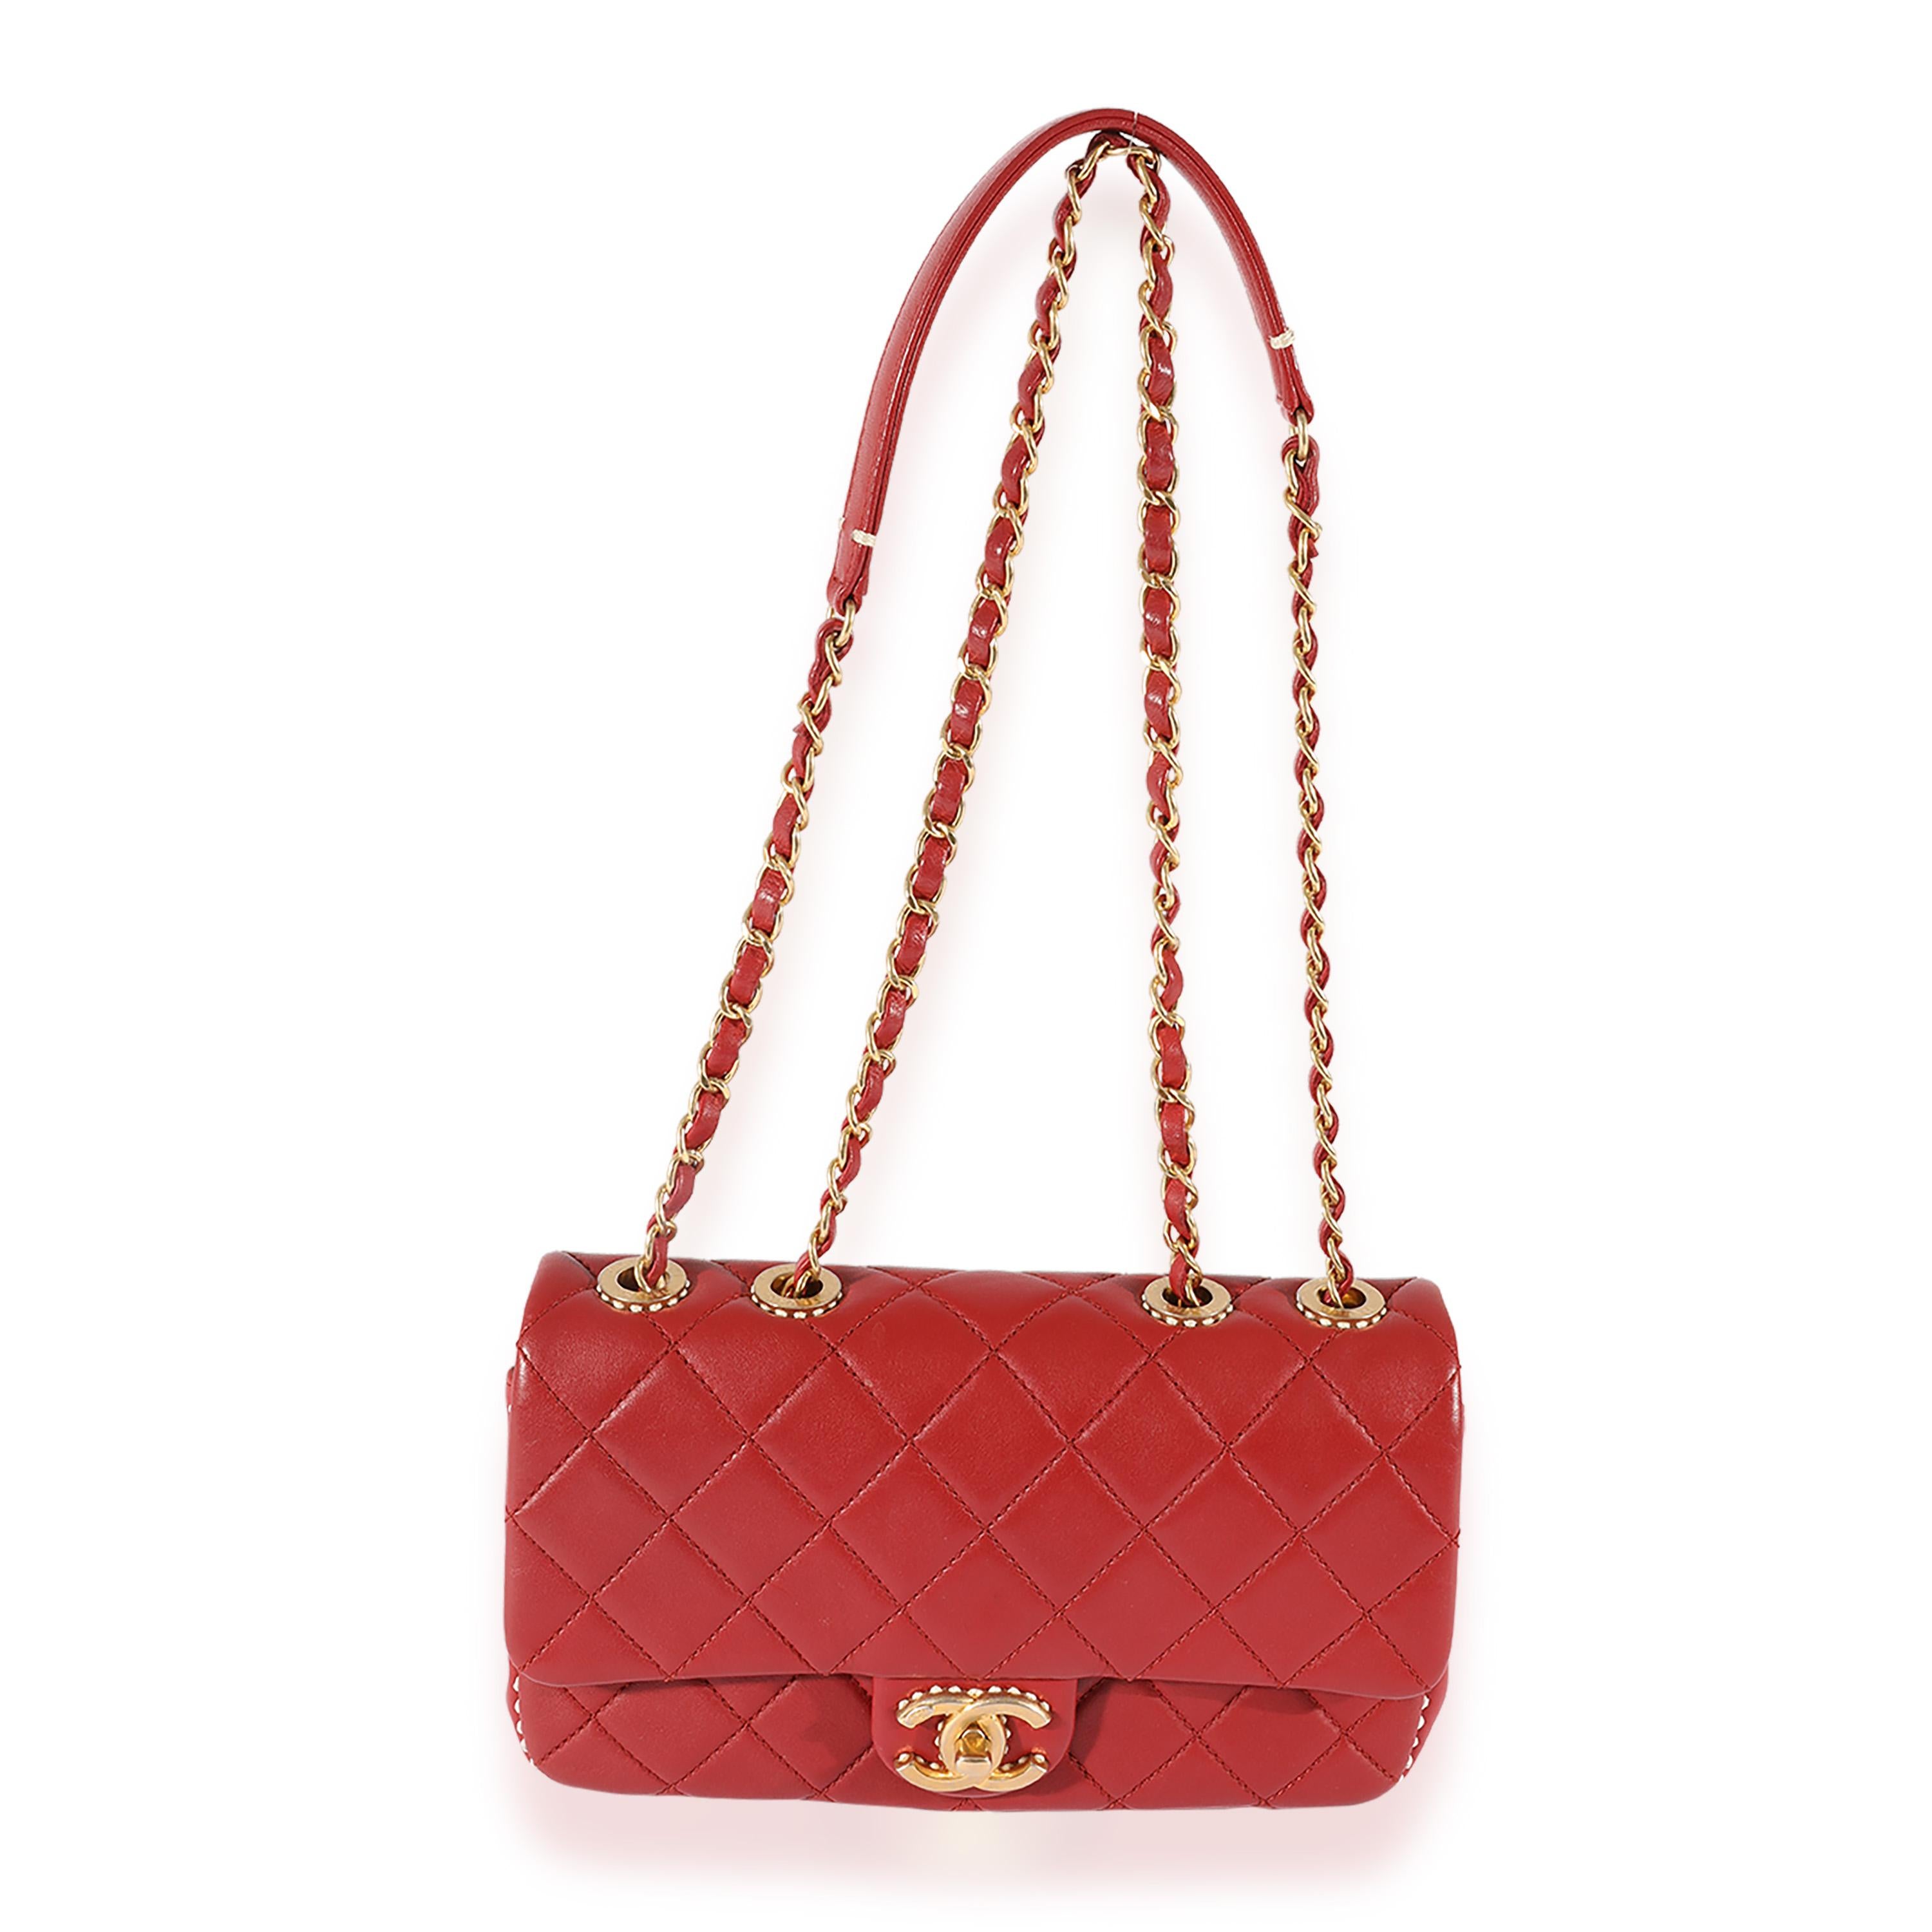 Listing Title: Chanel Red Quilted Leather White Stitch Flap Bag
SKU: 125360
Condition: Pre-owned 
Handbag Condition: Very Good
Condition Comments: Very Good Condition. Faint scuffing to exterior leather. Scuffing to interior leather. Light